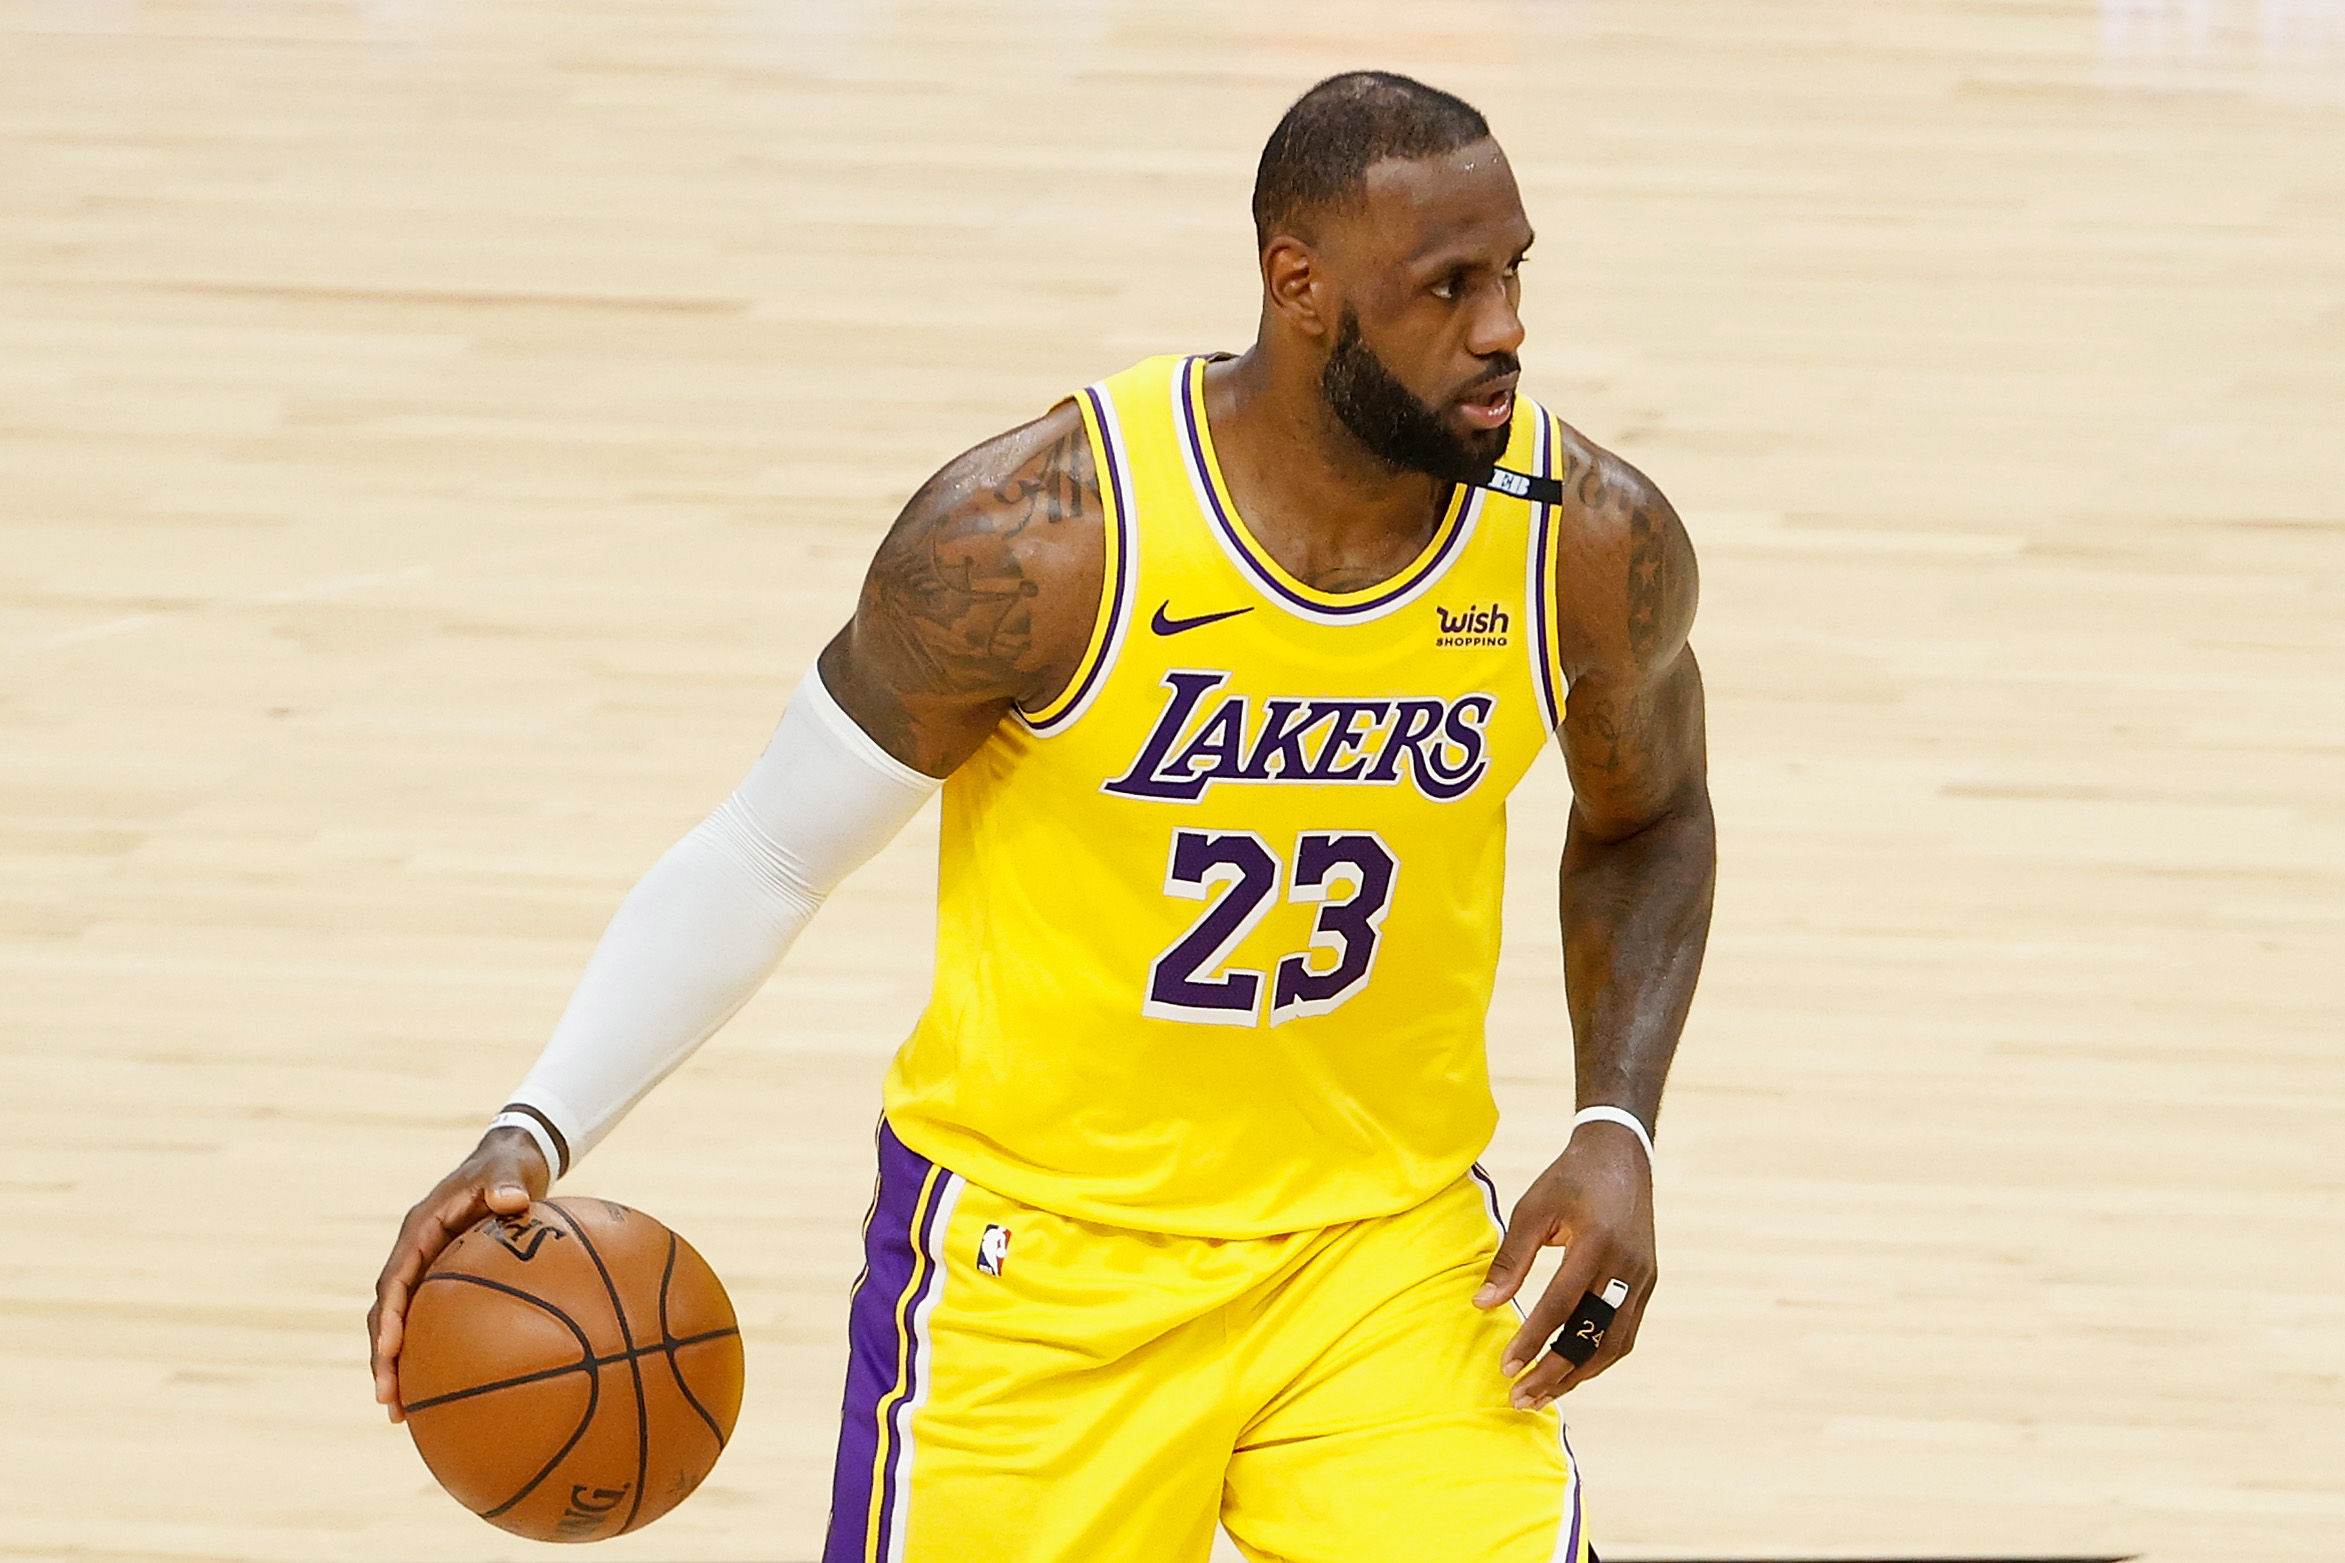 LeBron James will turn 37 in December, as he continues to find ways to extend his spectacular career.